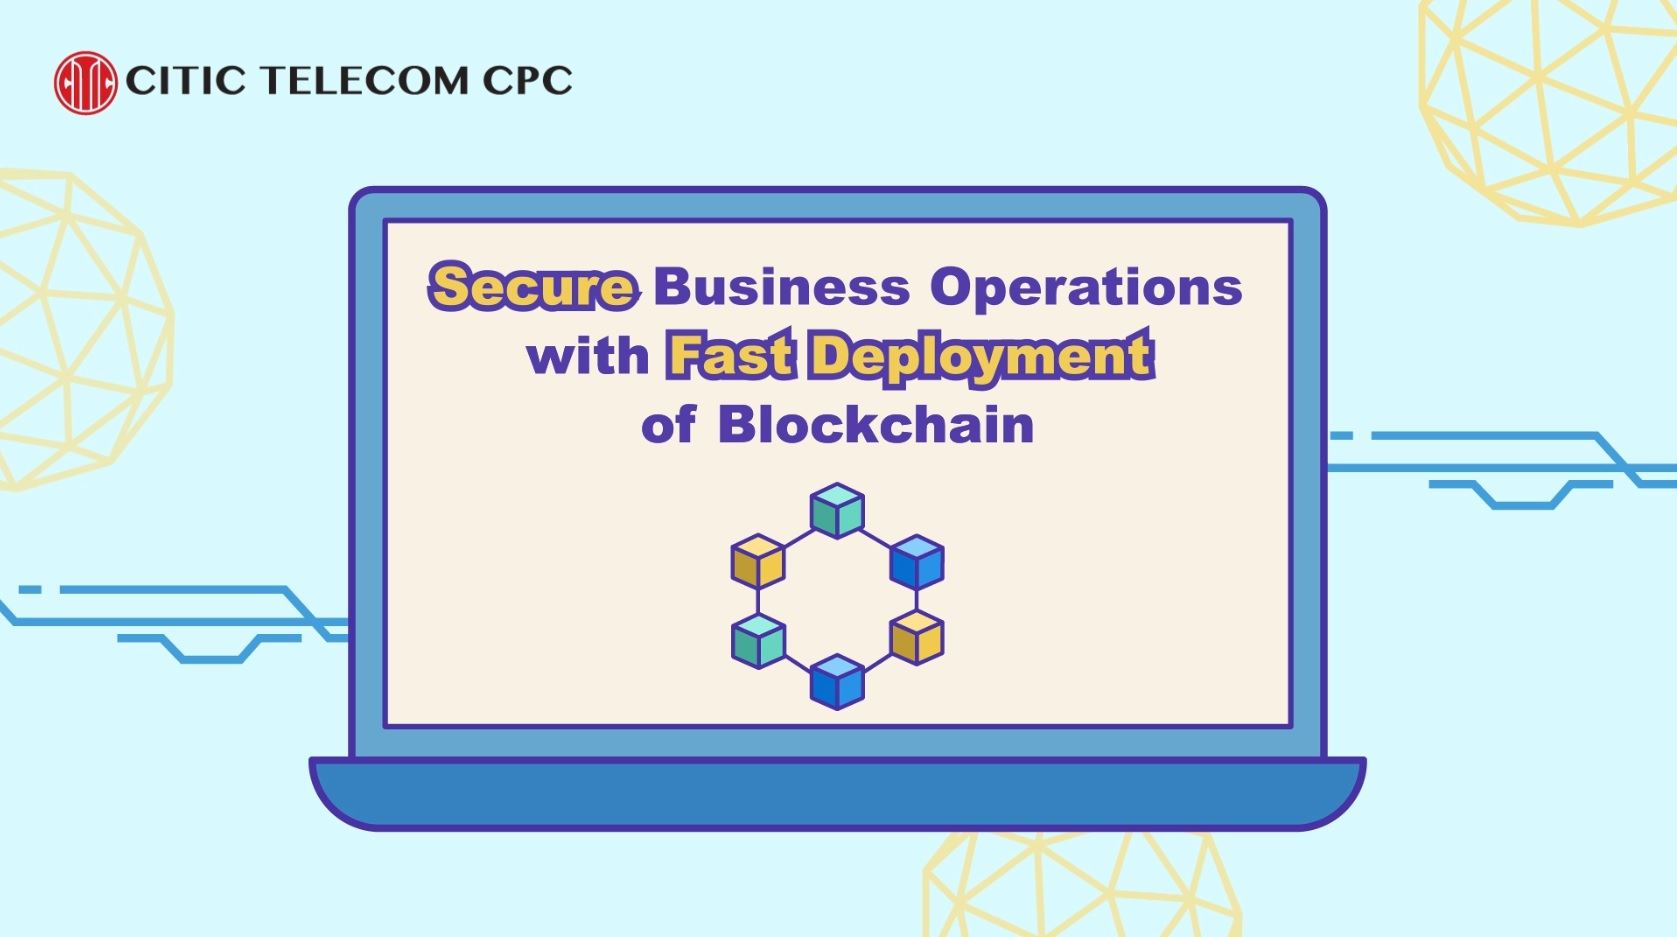 Secure Business Operation with Fast Deployment of Blockchain